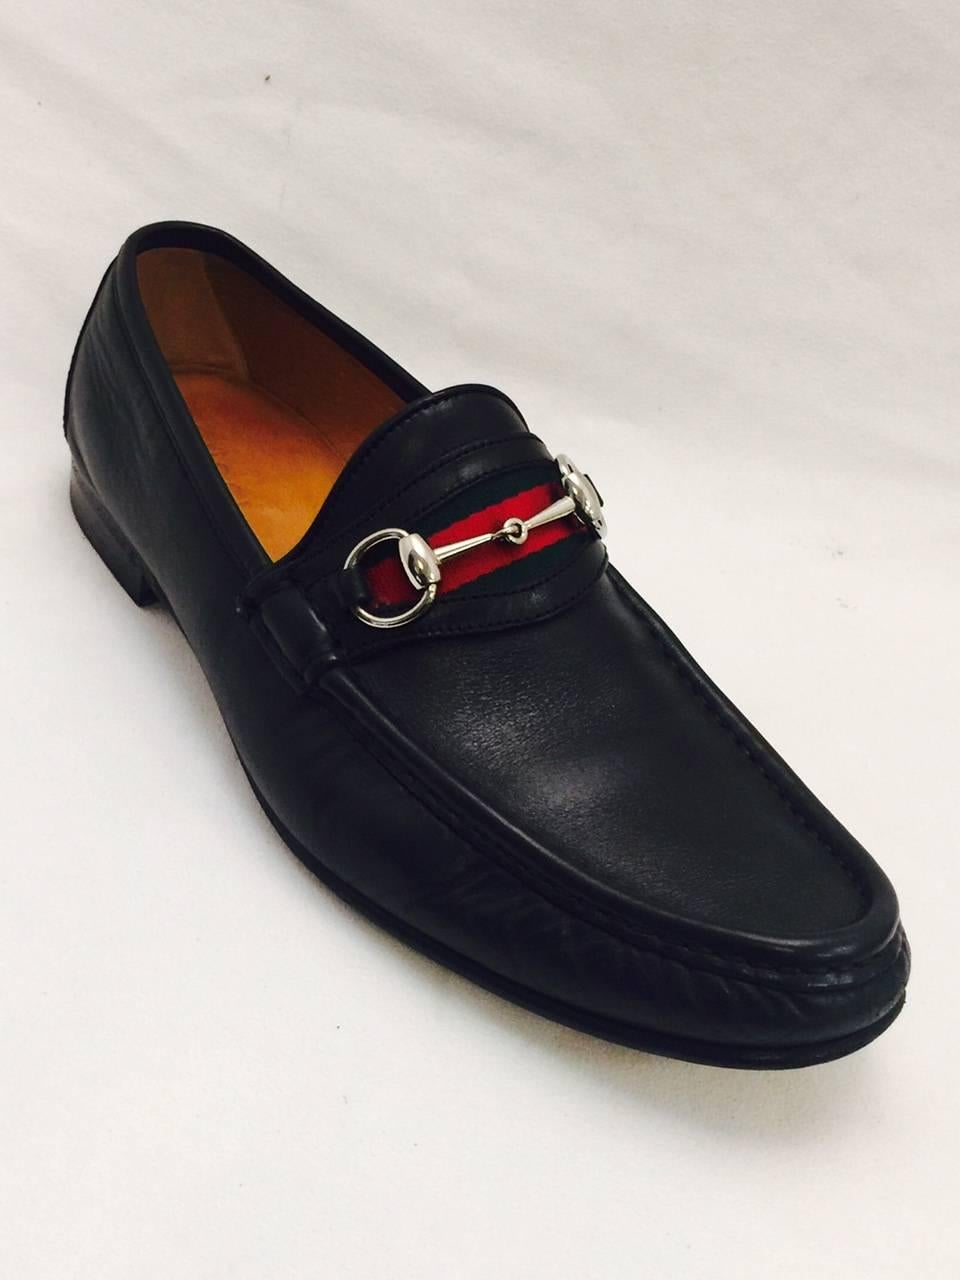 Men's Gucci Penny Loafers with Iconic Ribbon Stripe & Horsebit. Sz 9 1/2 Black 2